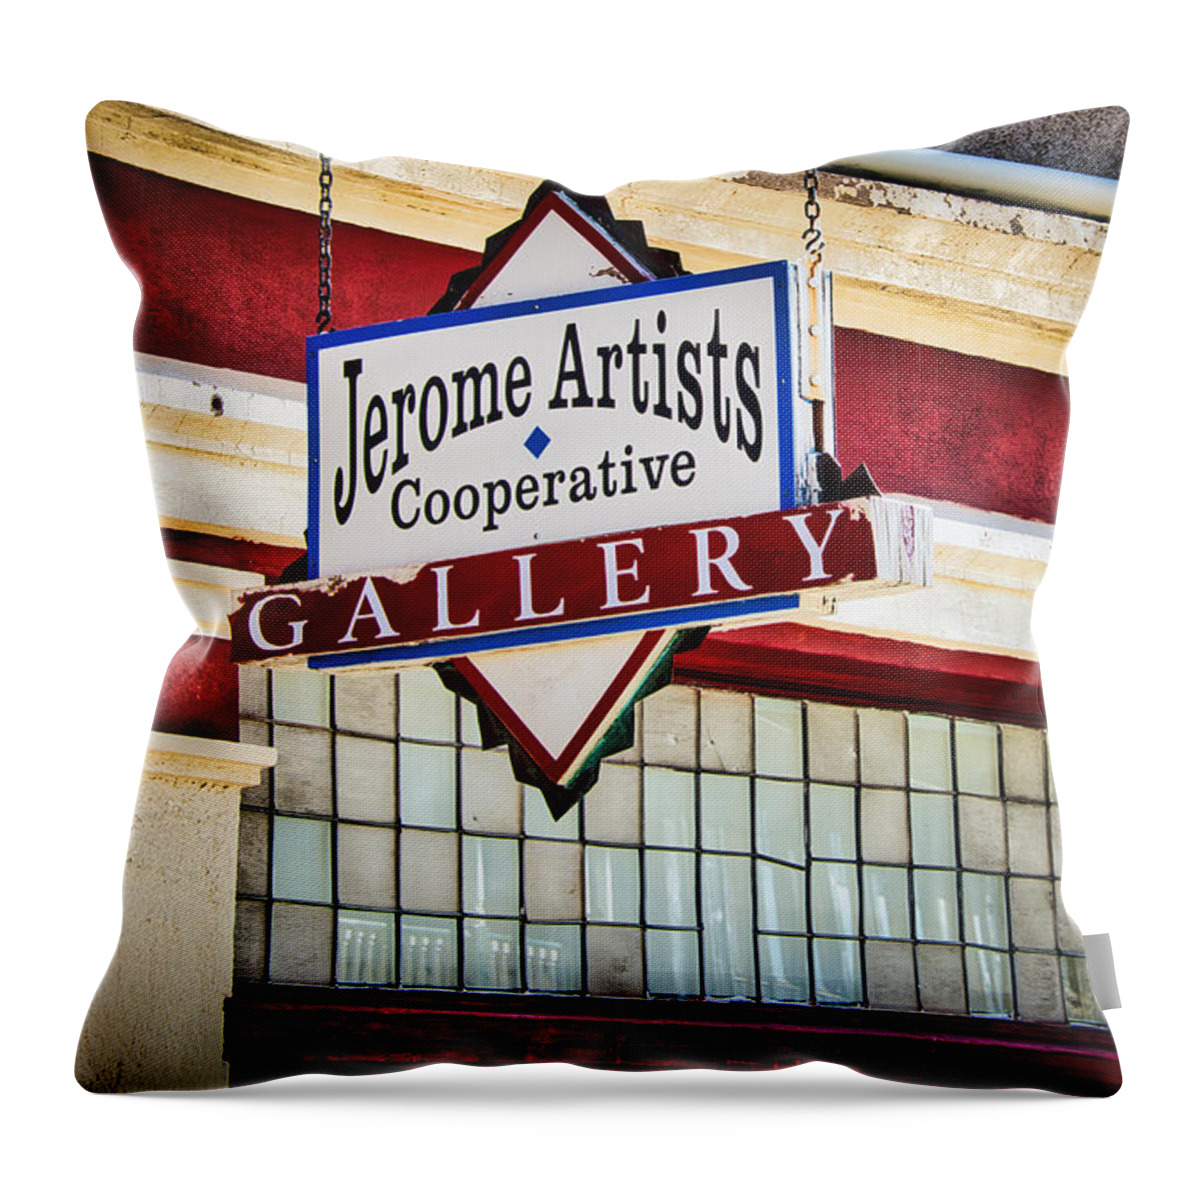 Jerome Throw Pillow featuring the photograph Jerome Artists Cooperative Gallery Sign - Arizona by Stuart Litoff